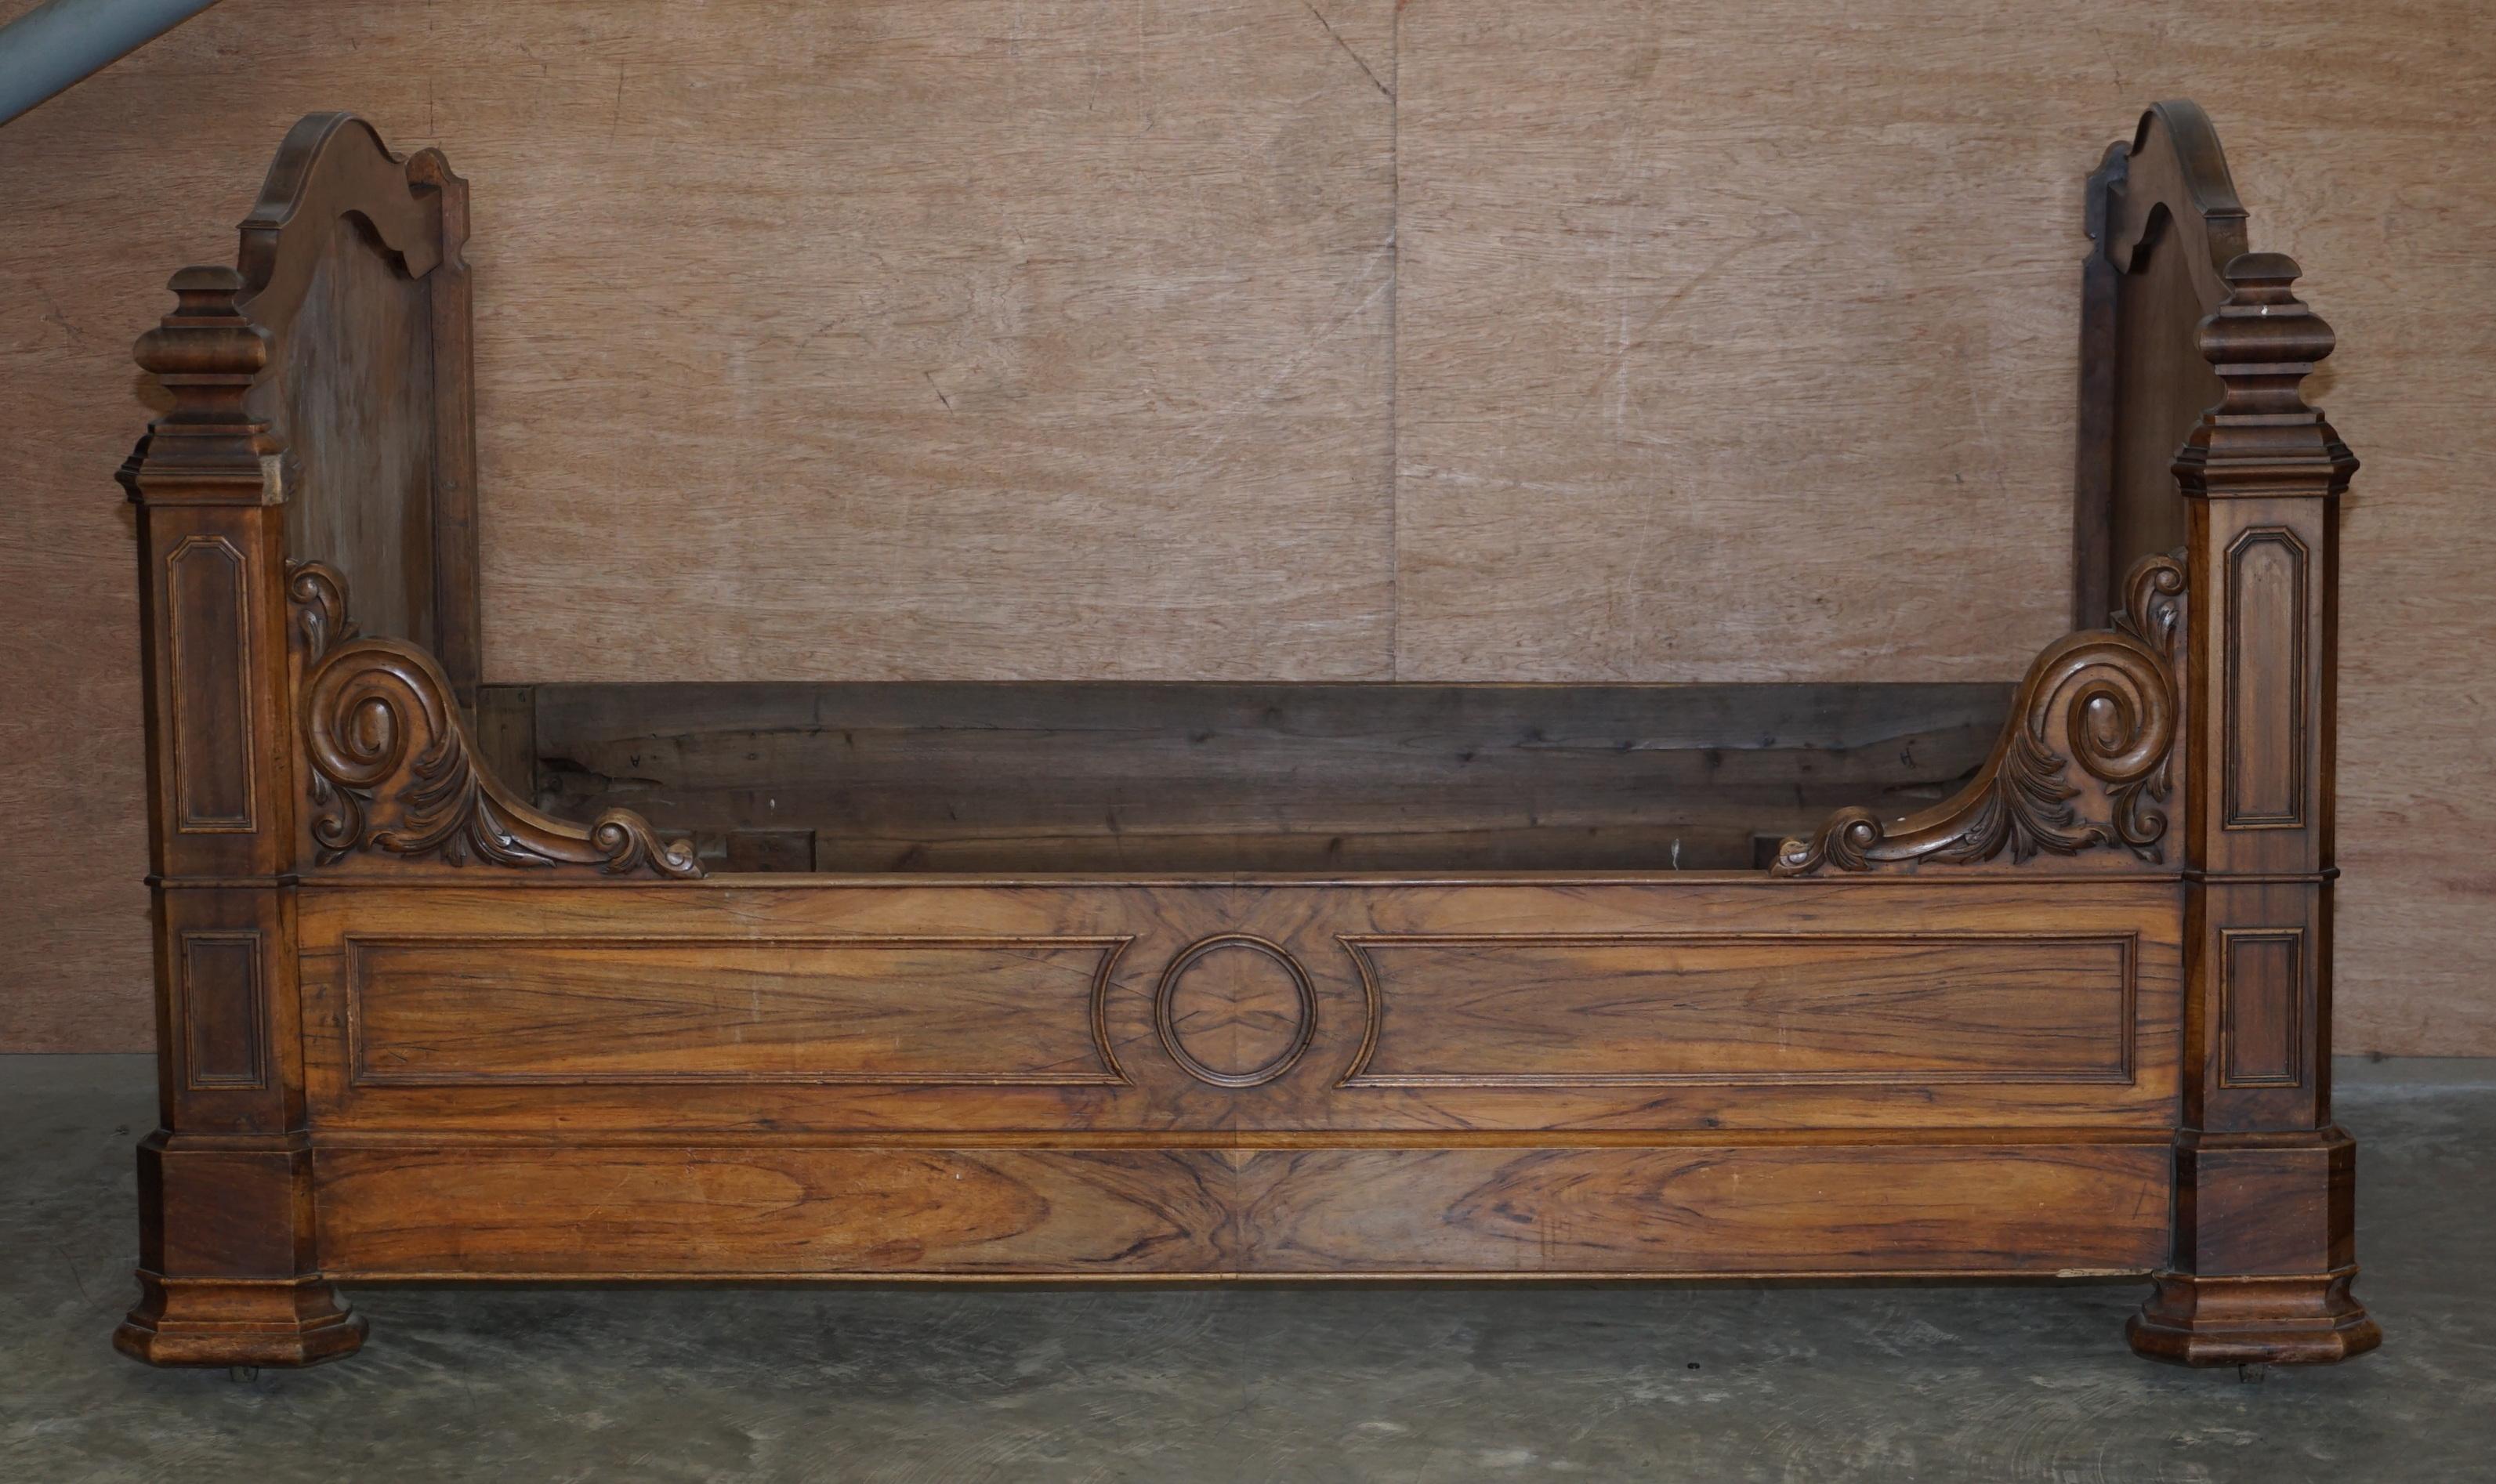 We are delighted to offer this extremely rare circa 1835 Louis Philippe French hardwood alcove daybed frame

This piece is 100% original, unrestored and exactly as it would have been made nearly 200 years ago. Its designed to sit against a wall